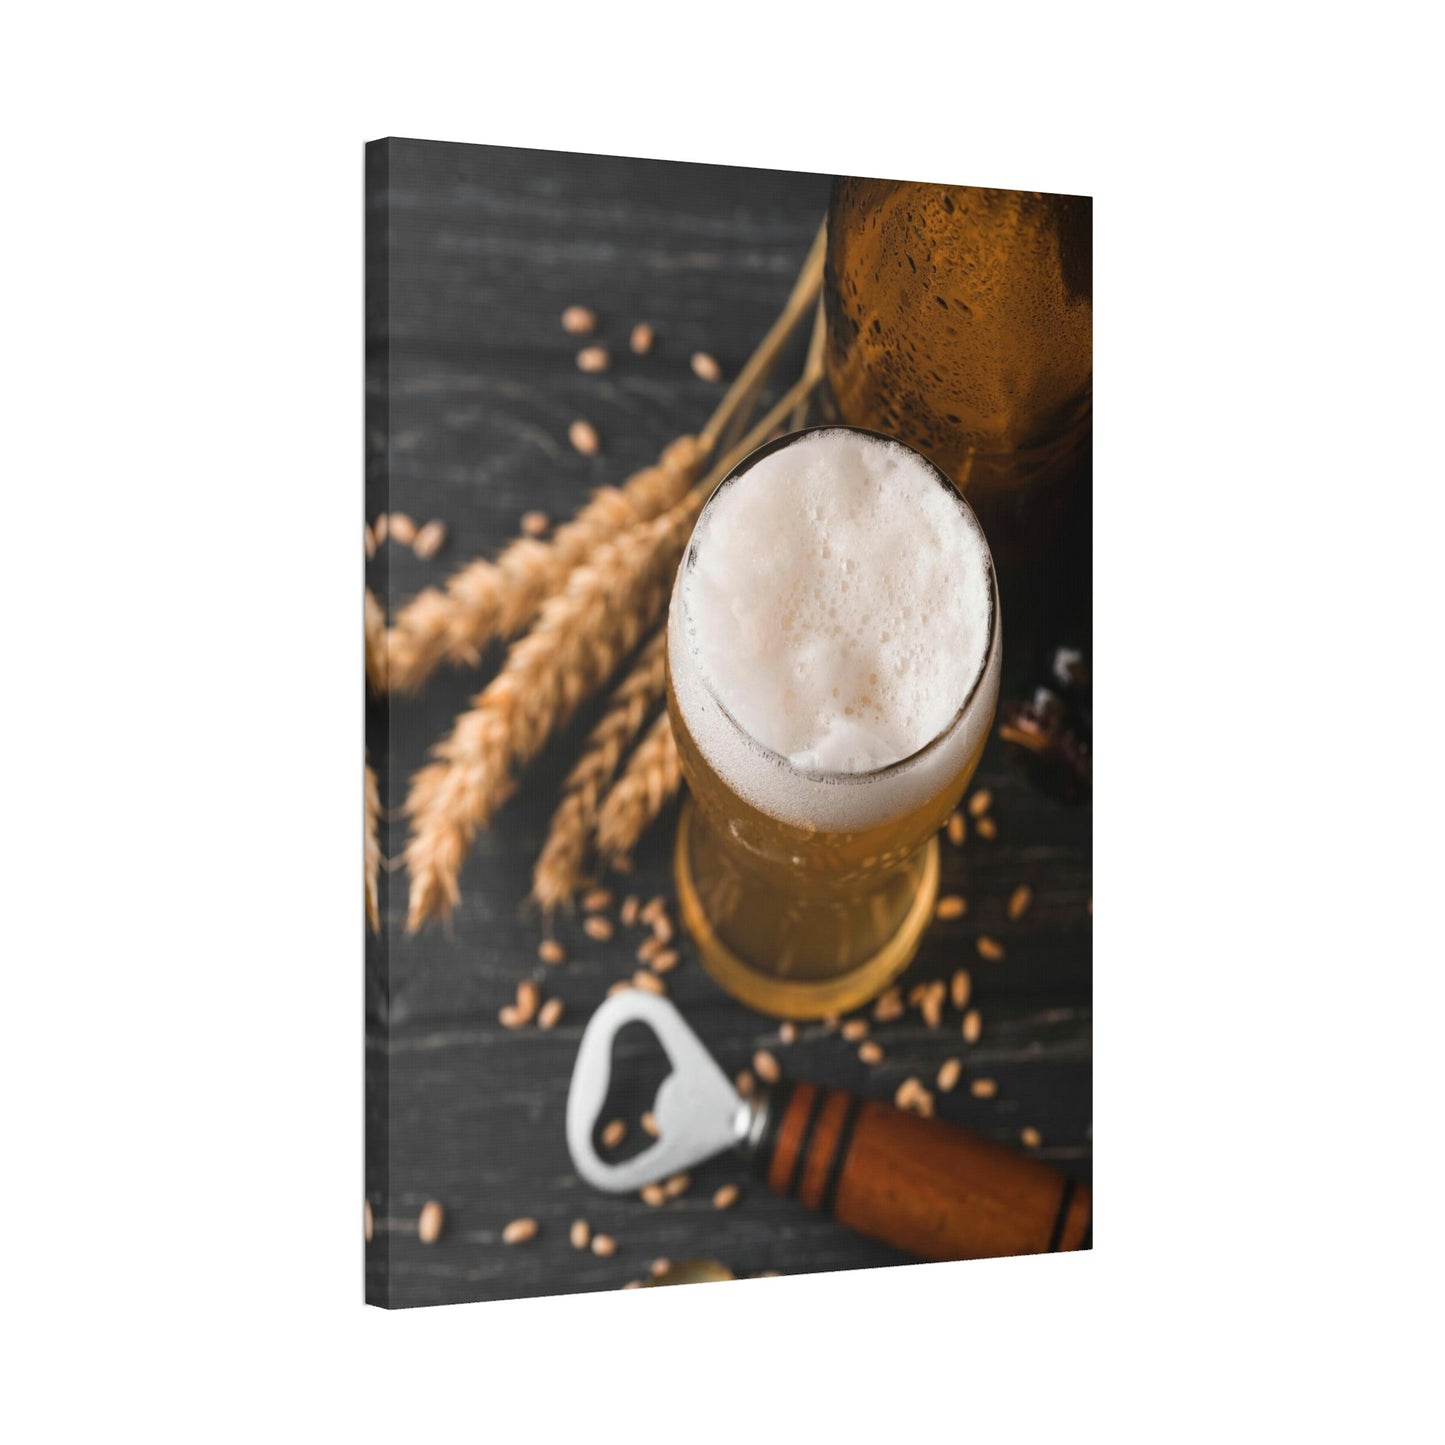 Beer Cheers: Fun and Colorful Framed Canvas Print for Your Home Bar